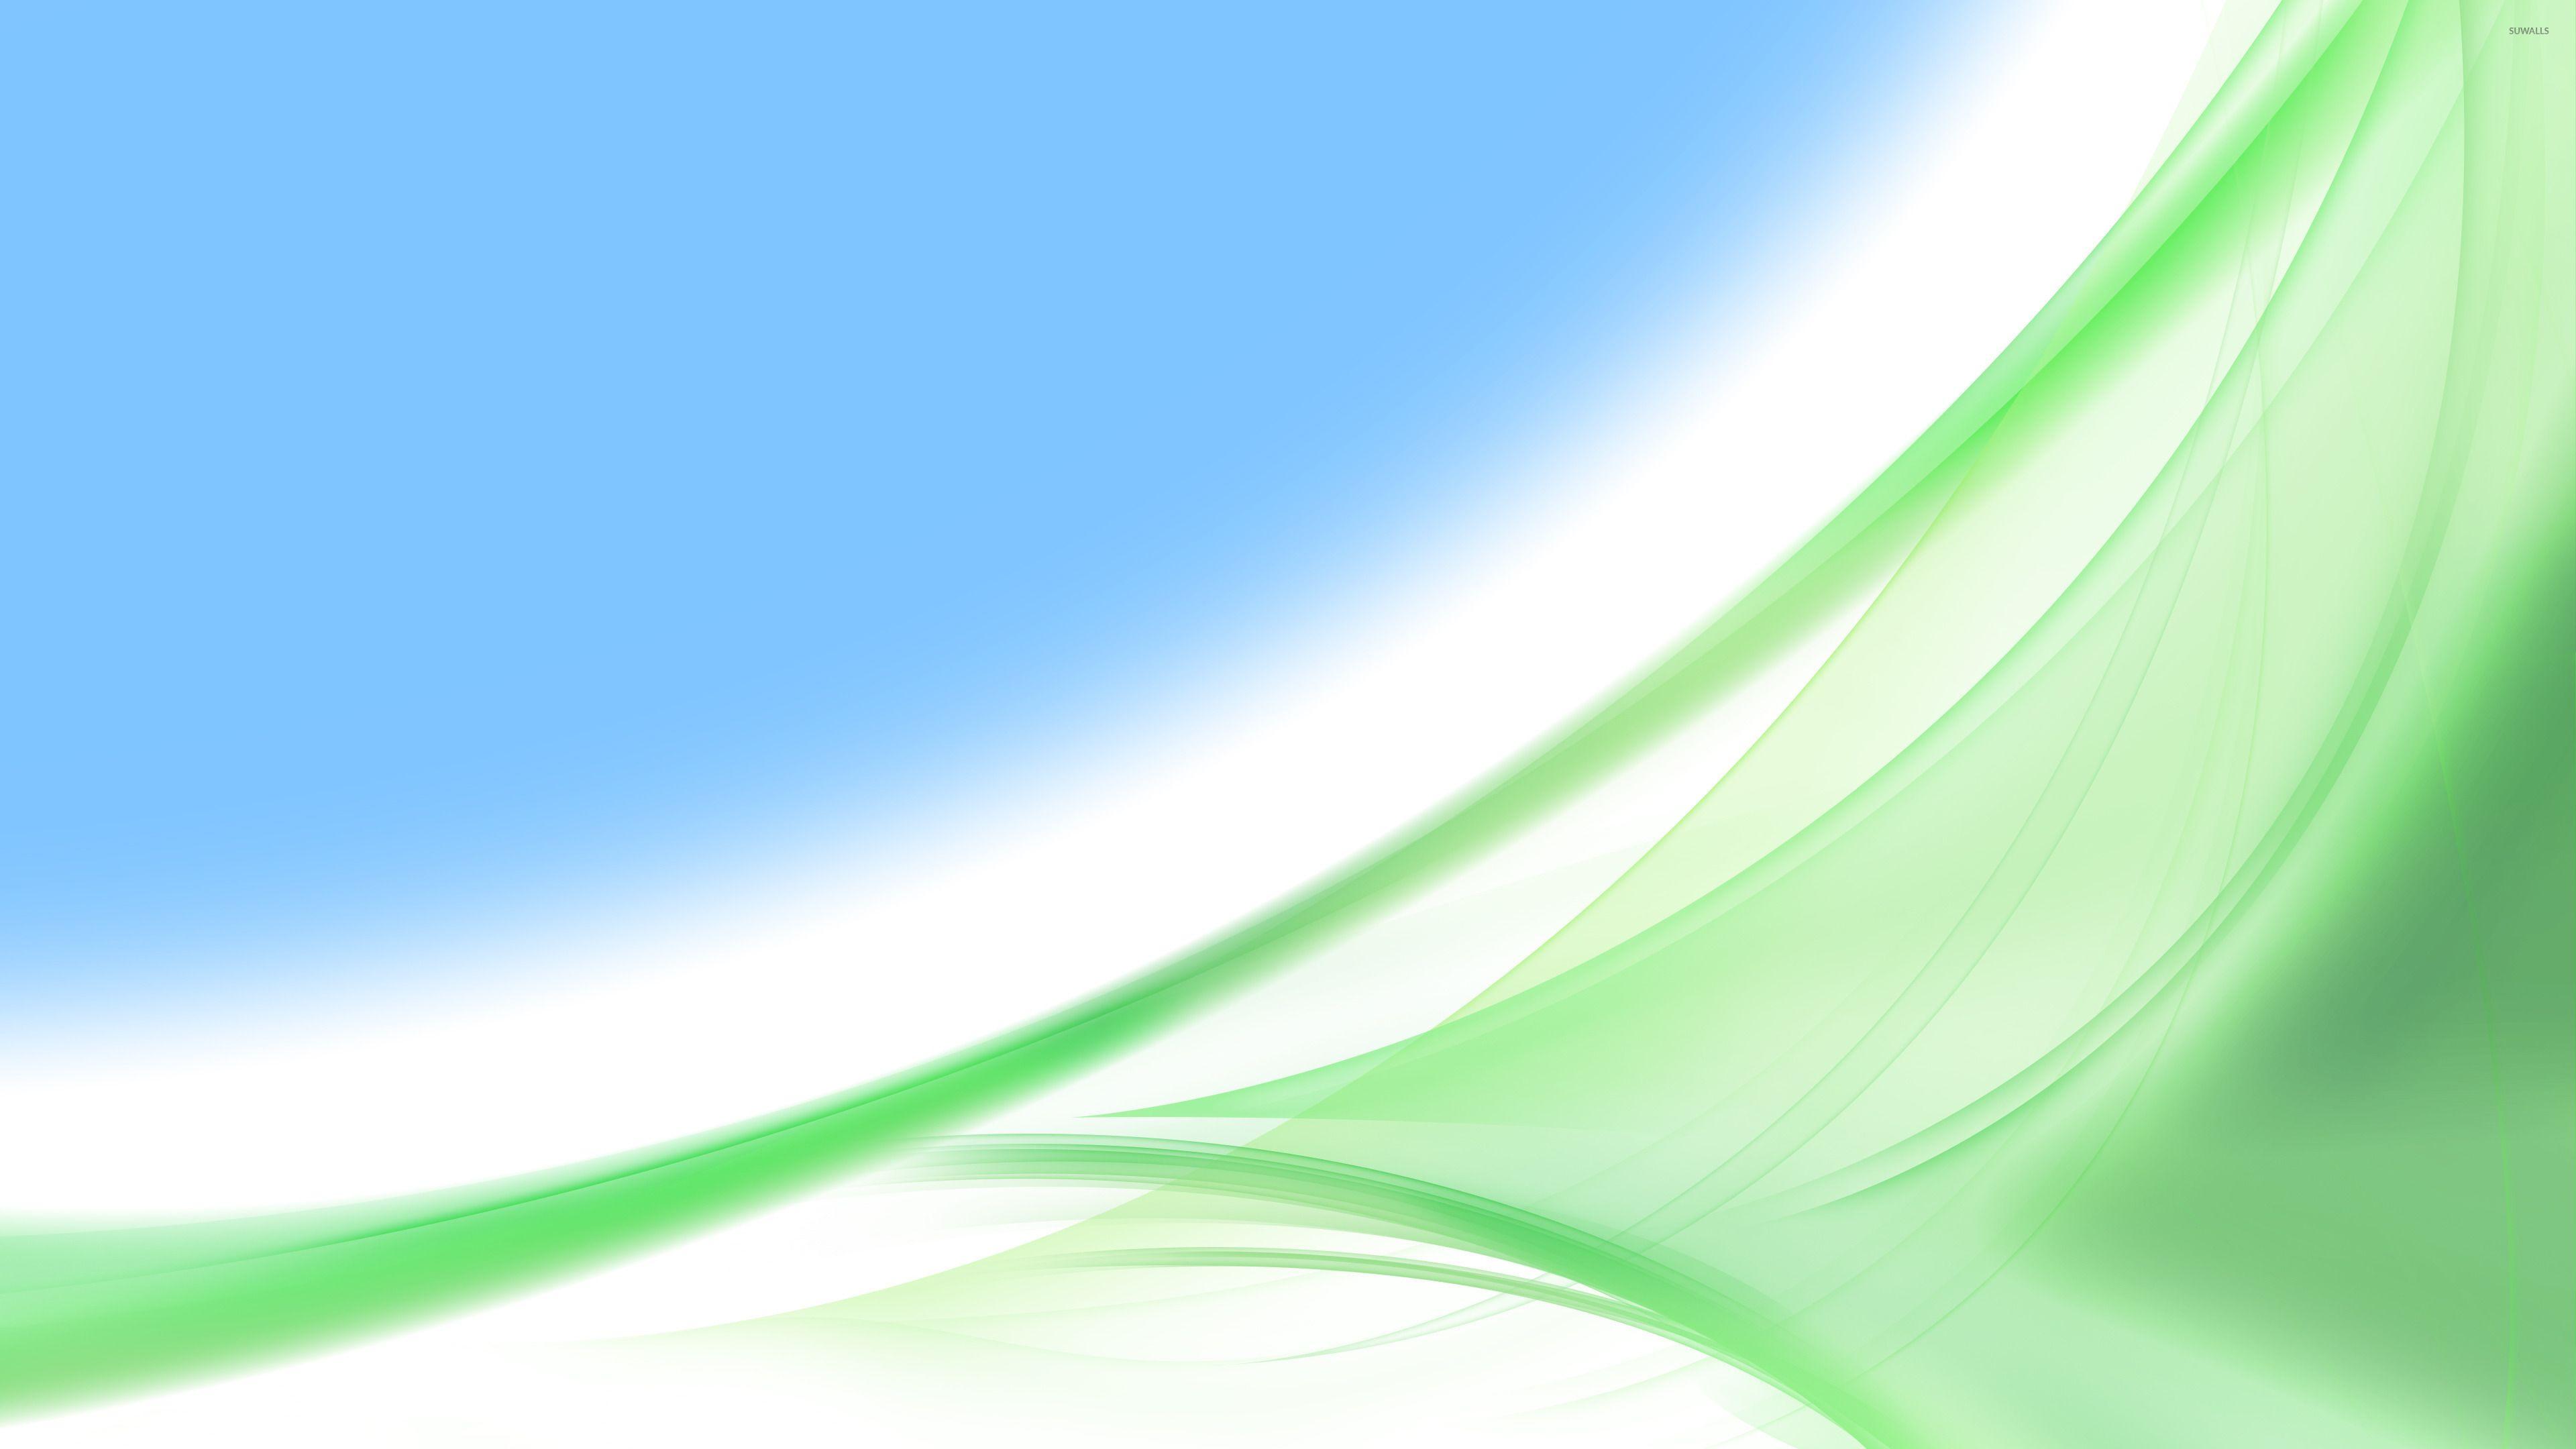 Blue and Green Abstract Wallpaper Free Blue and Green